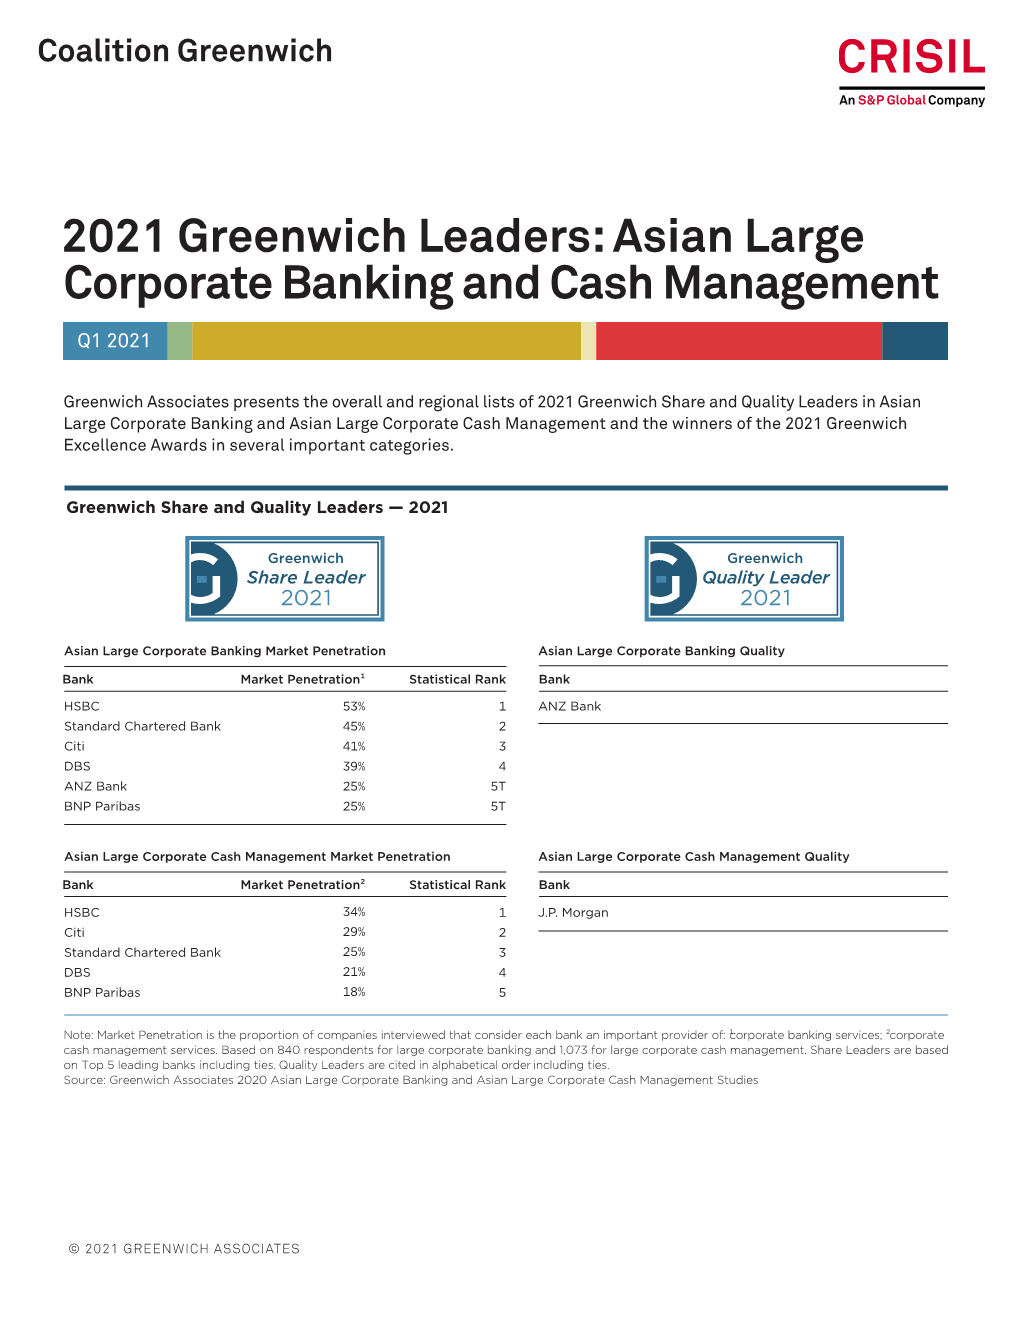 2021 Greenwich Leaders: Asian Large Corporate Banking and Cash Management